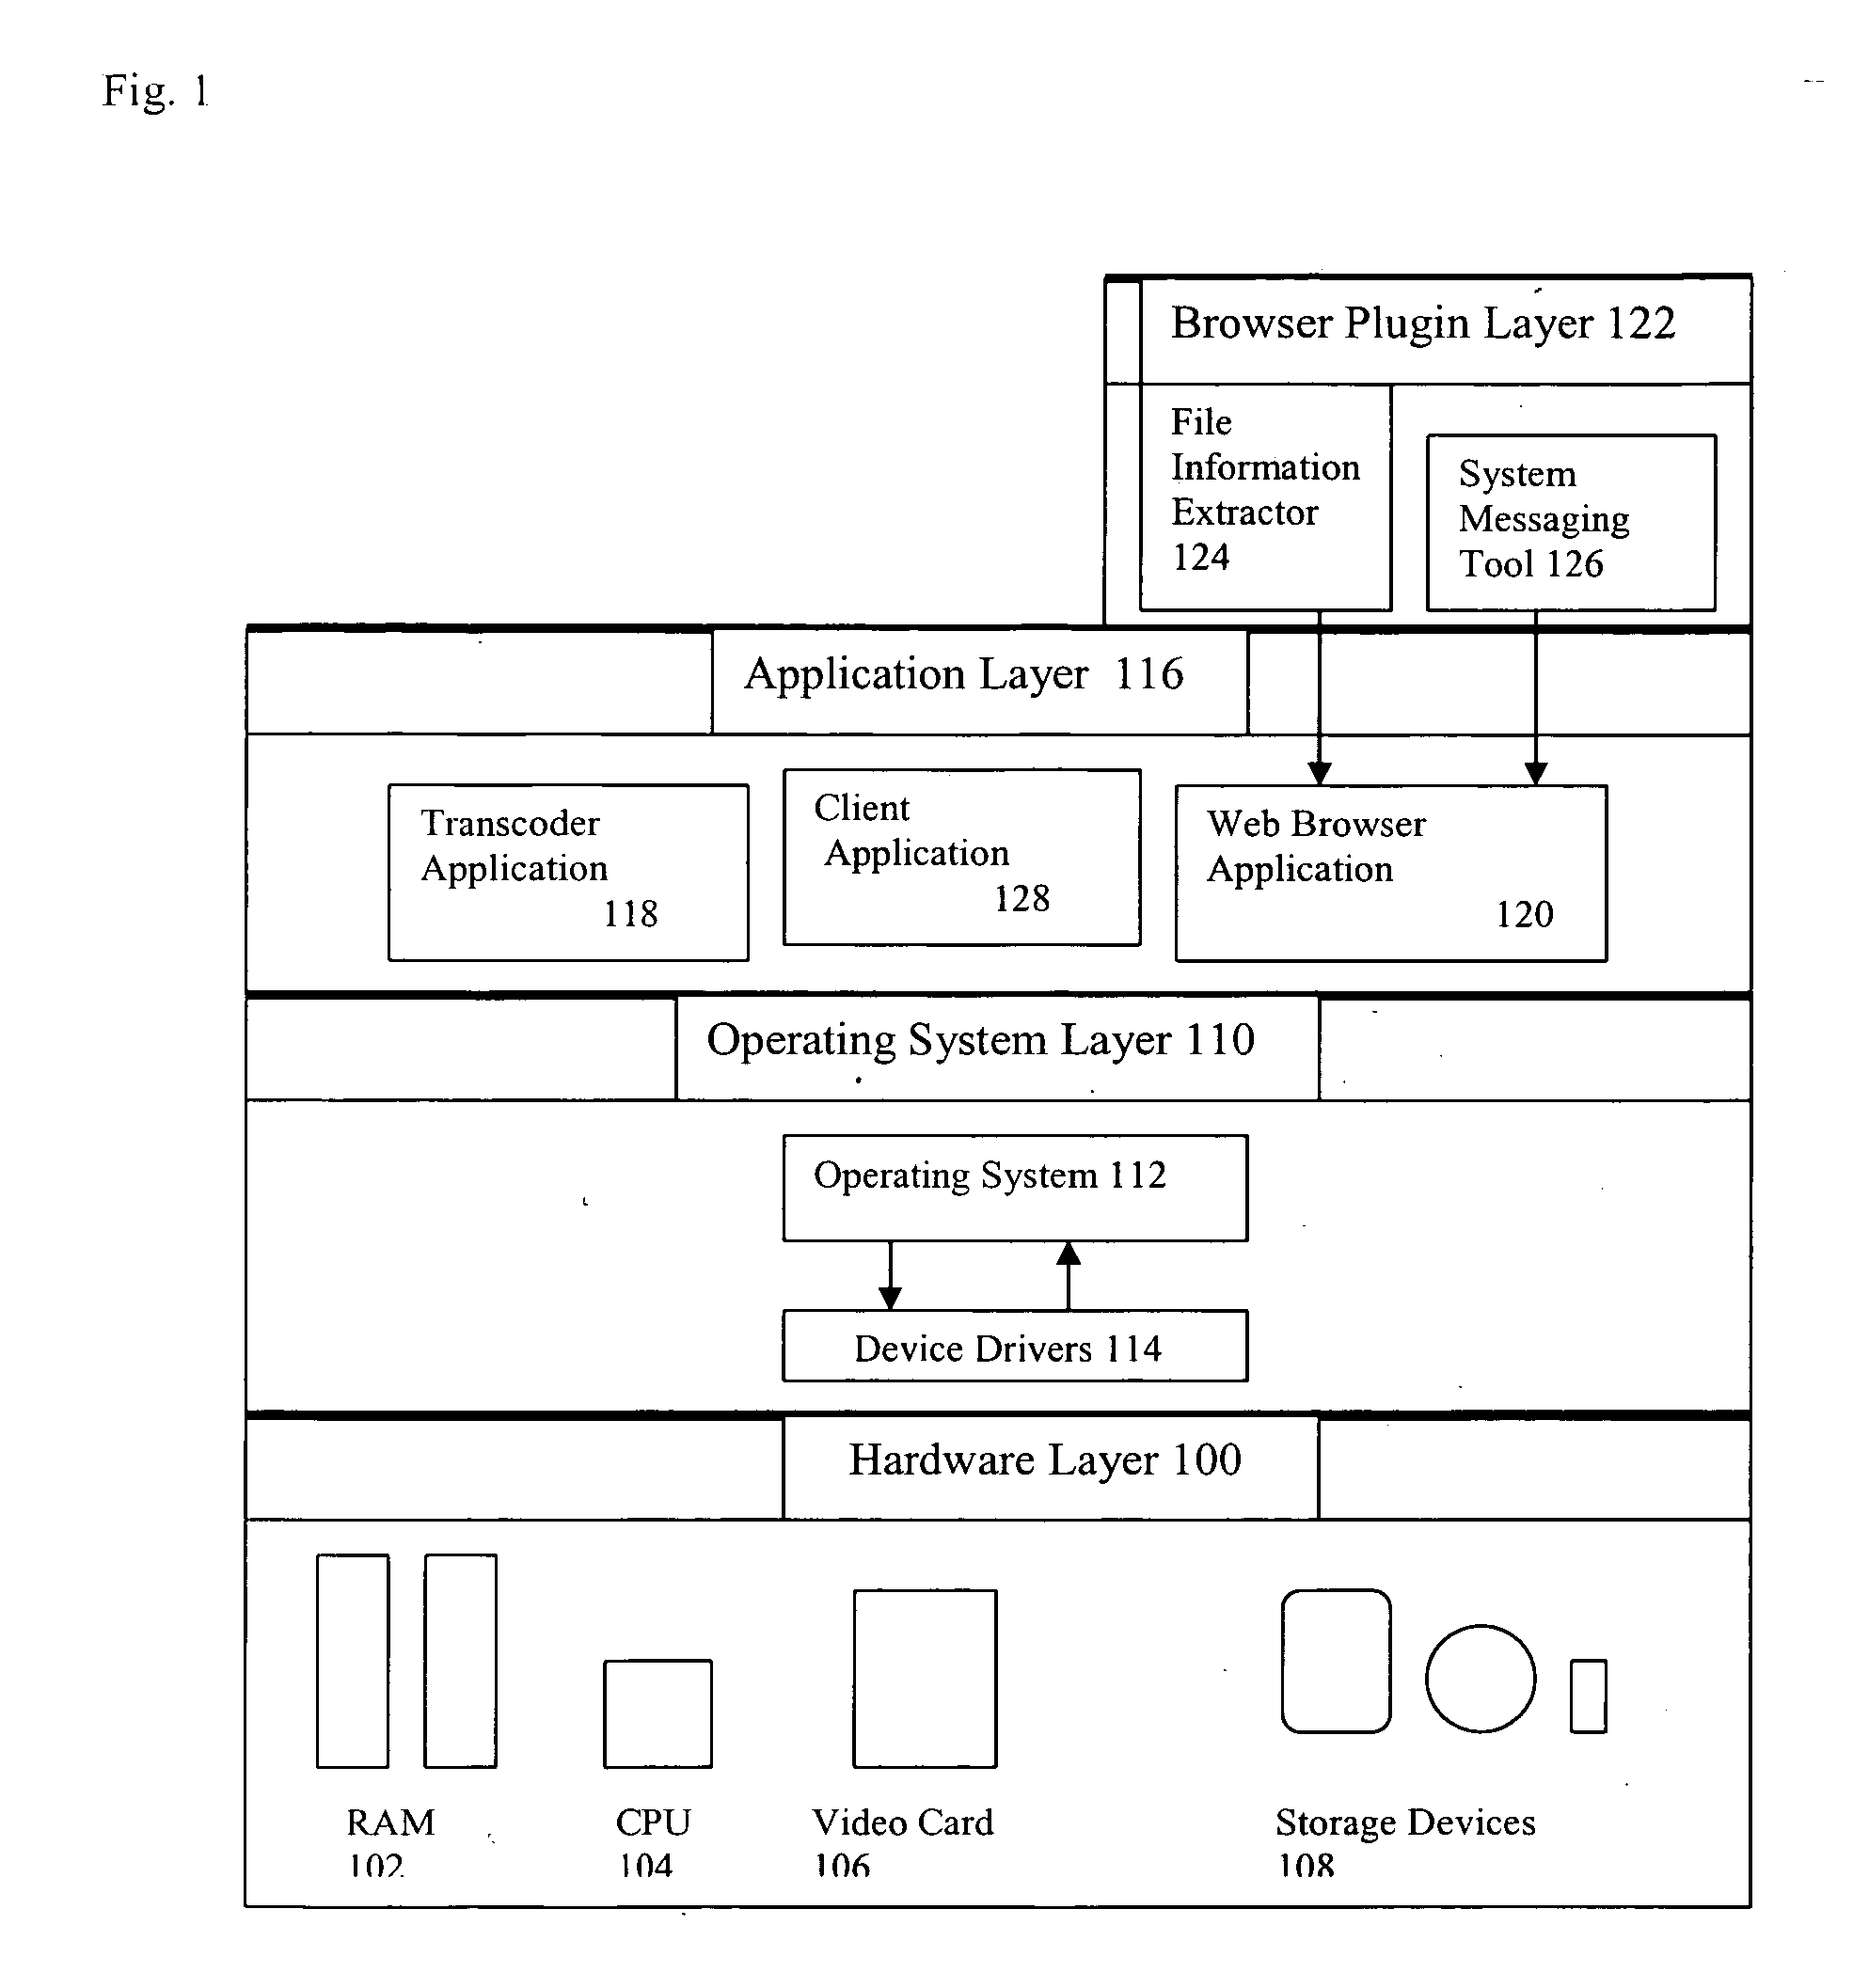 Systems and methods for uploading and downloading files in a distributed network